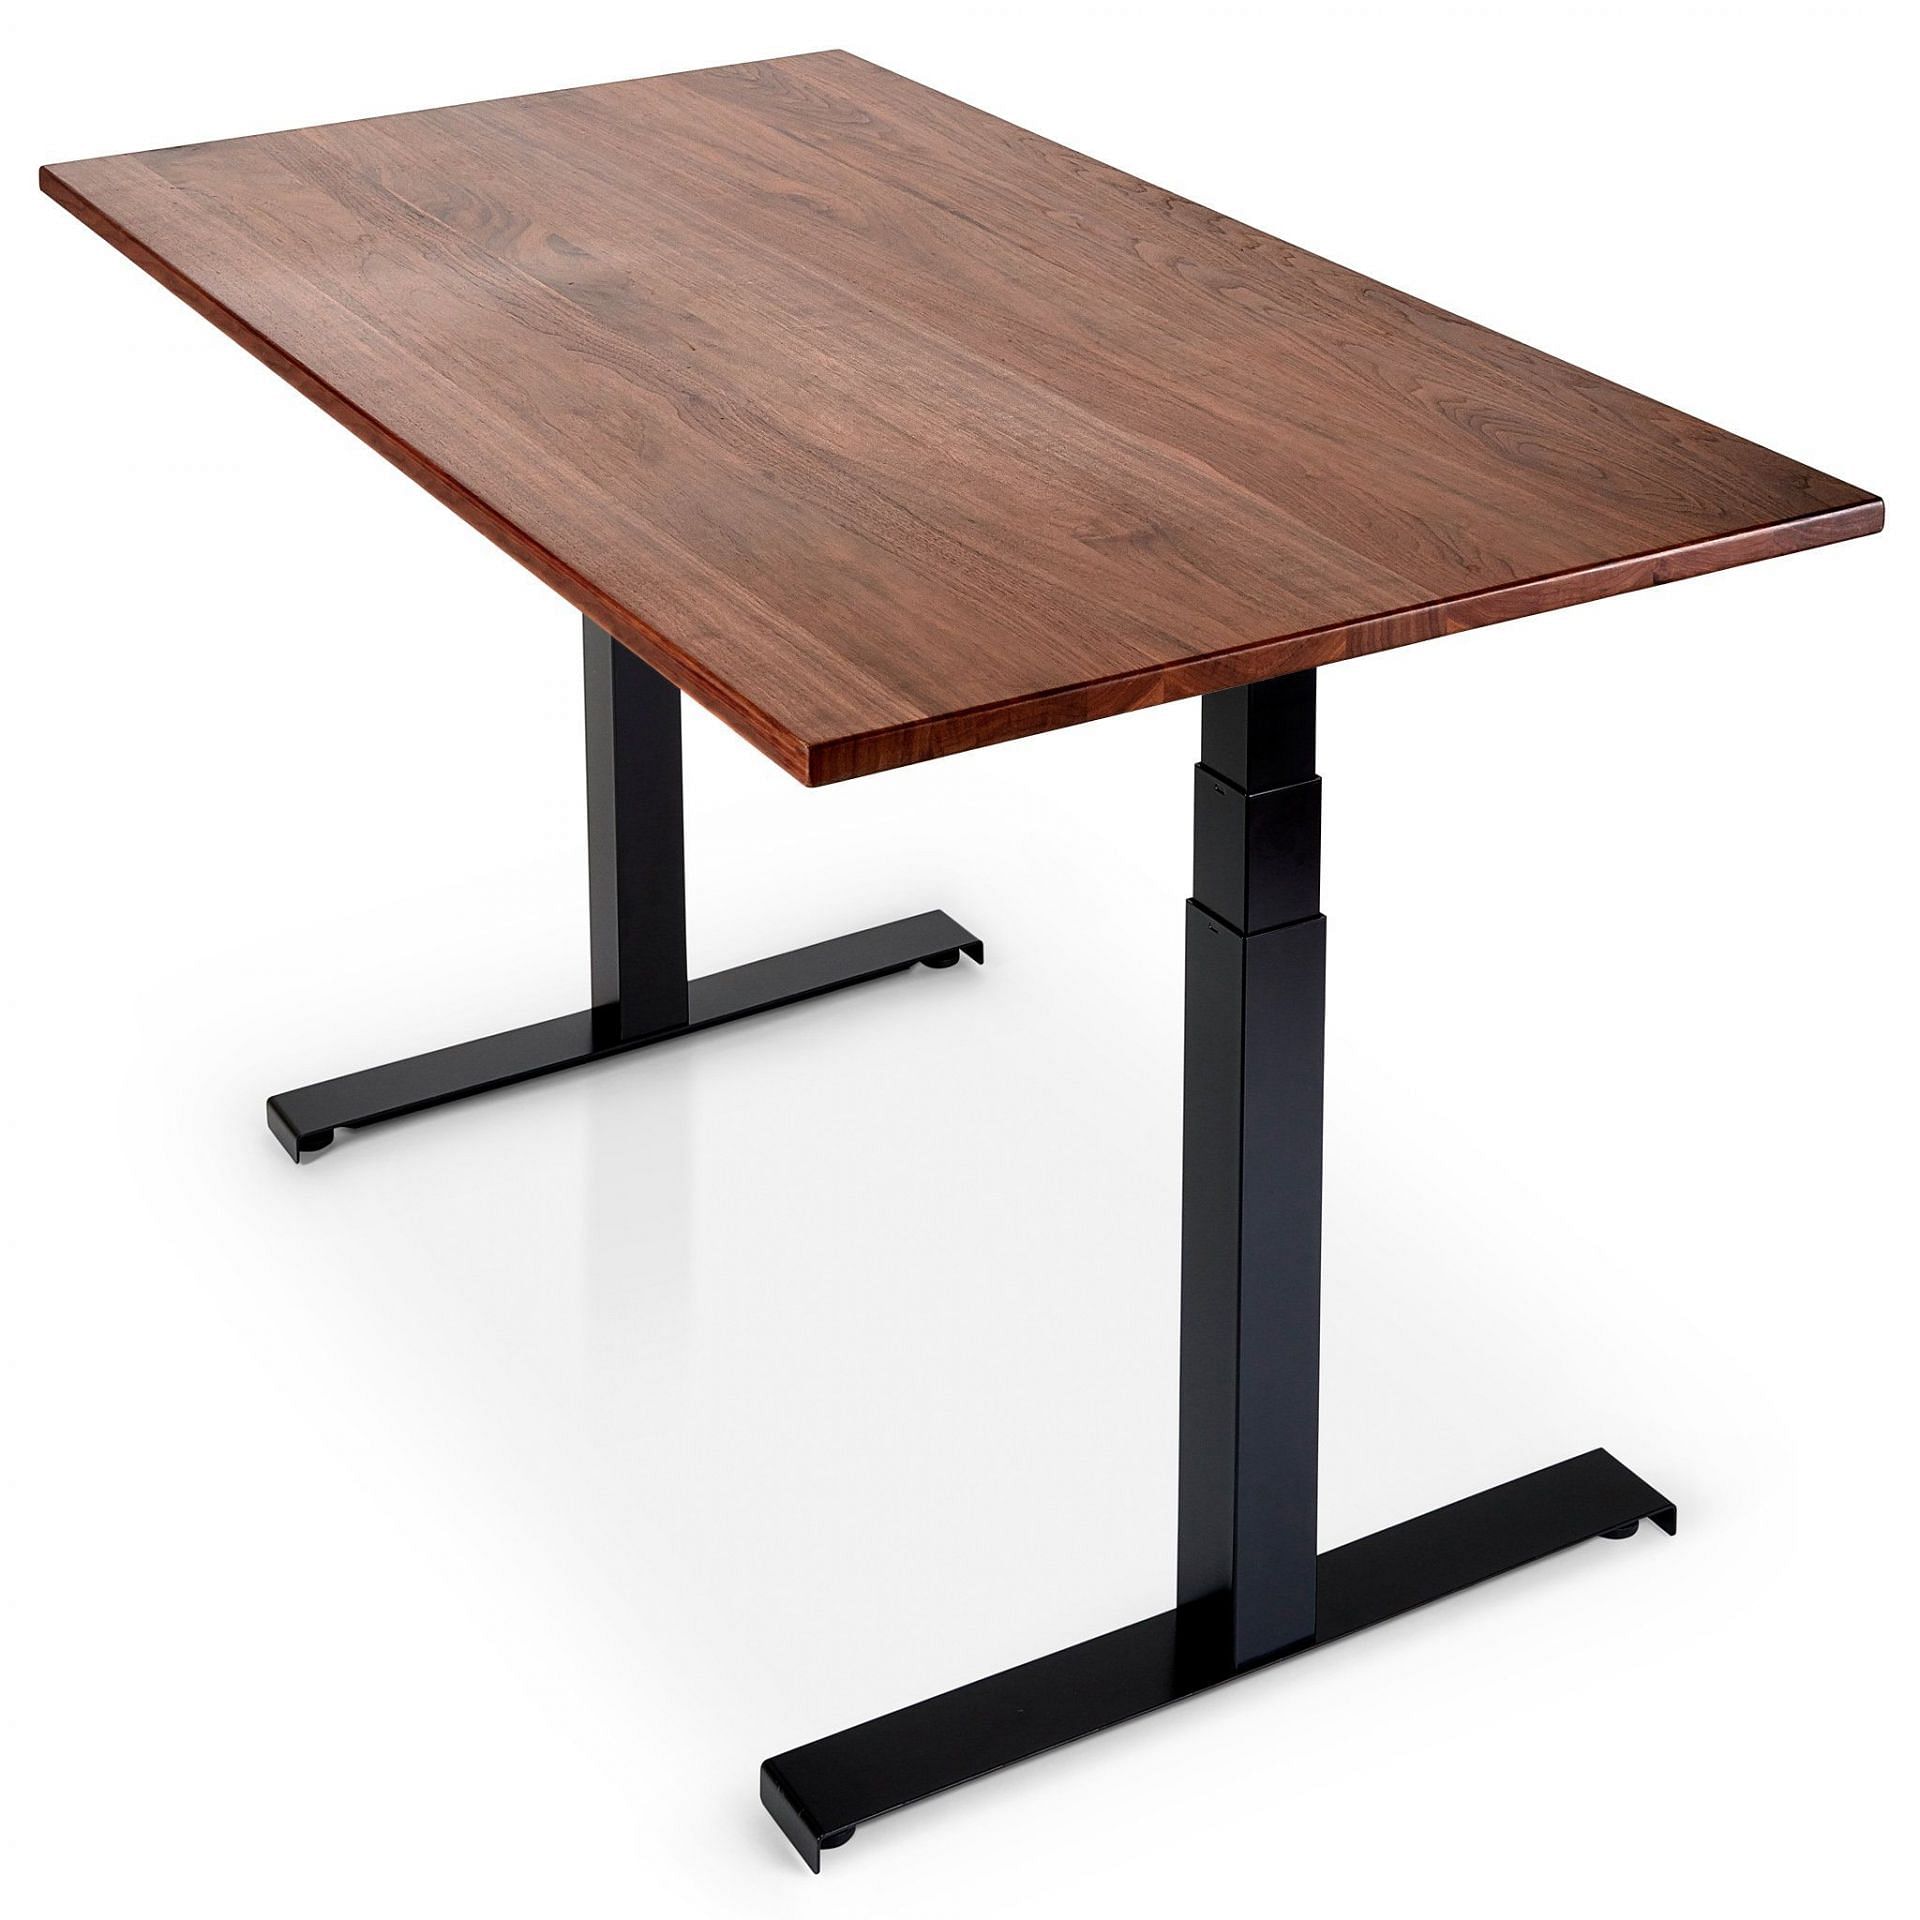 The Flomotion Standing Desk can house up to 120kg (Image via Flomotion)